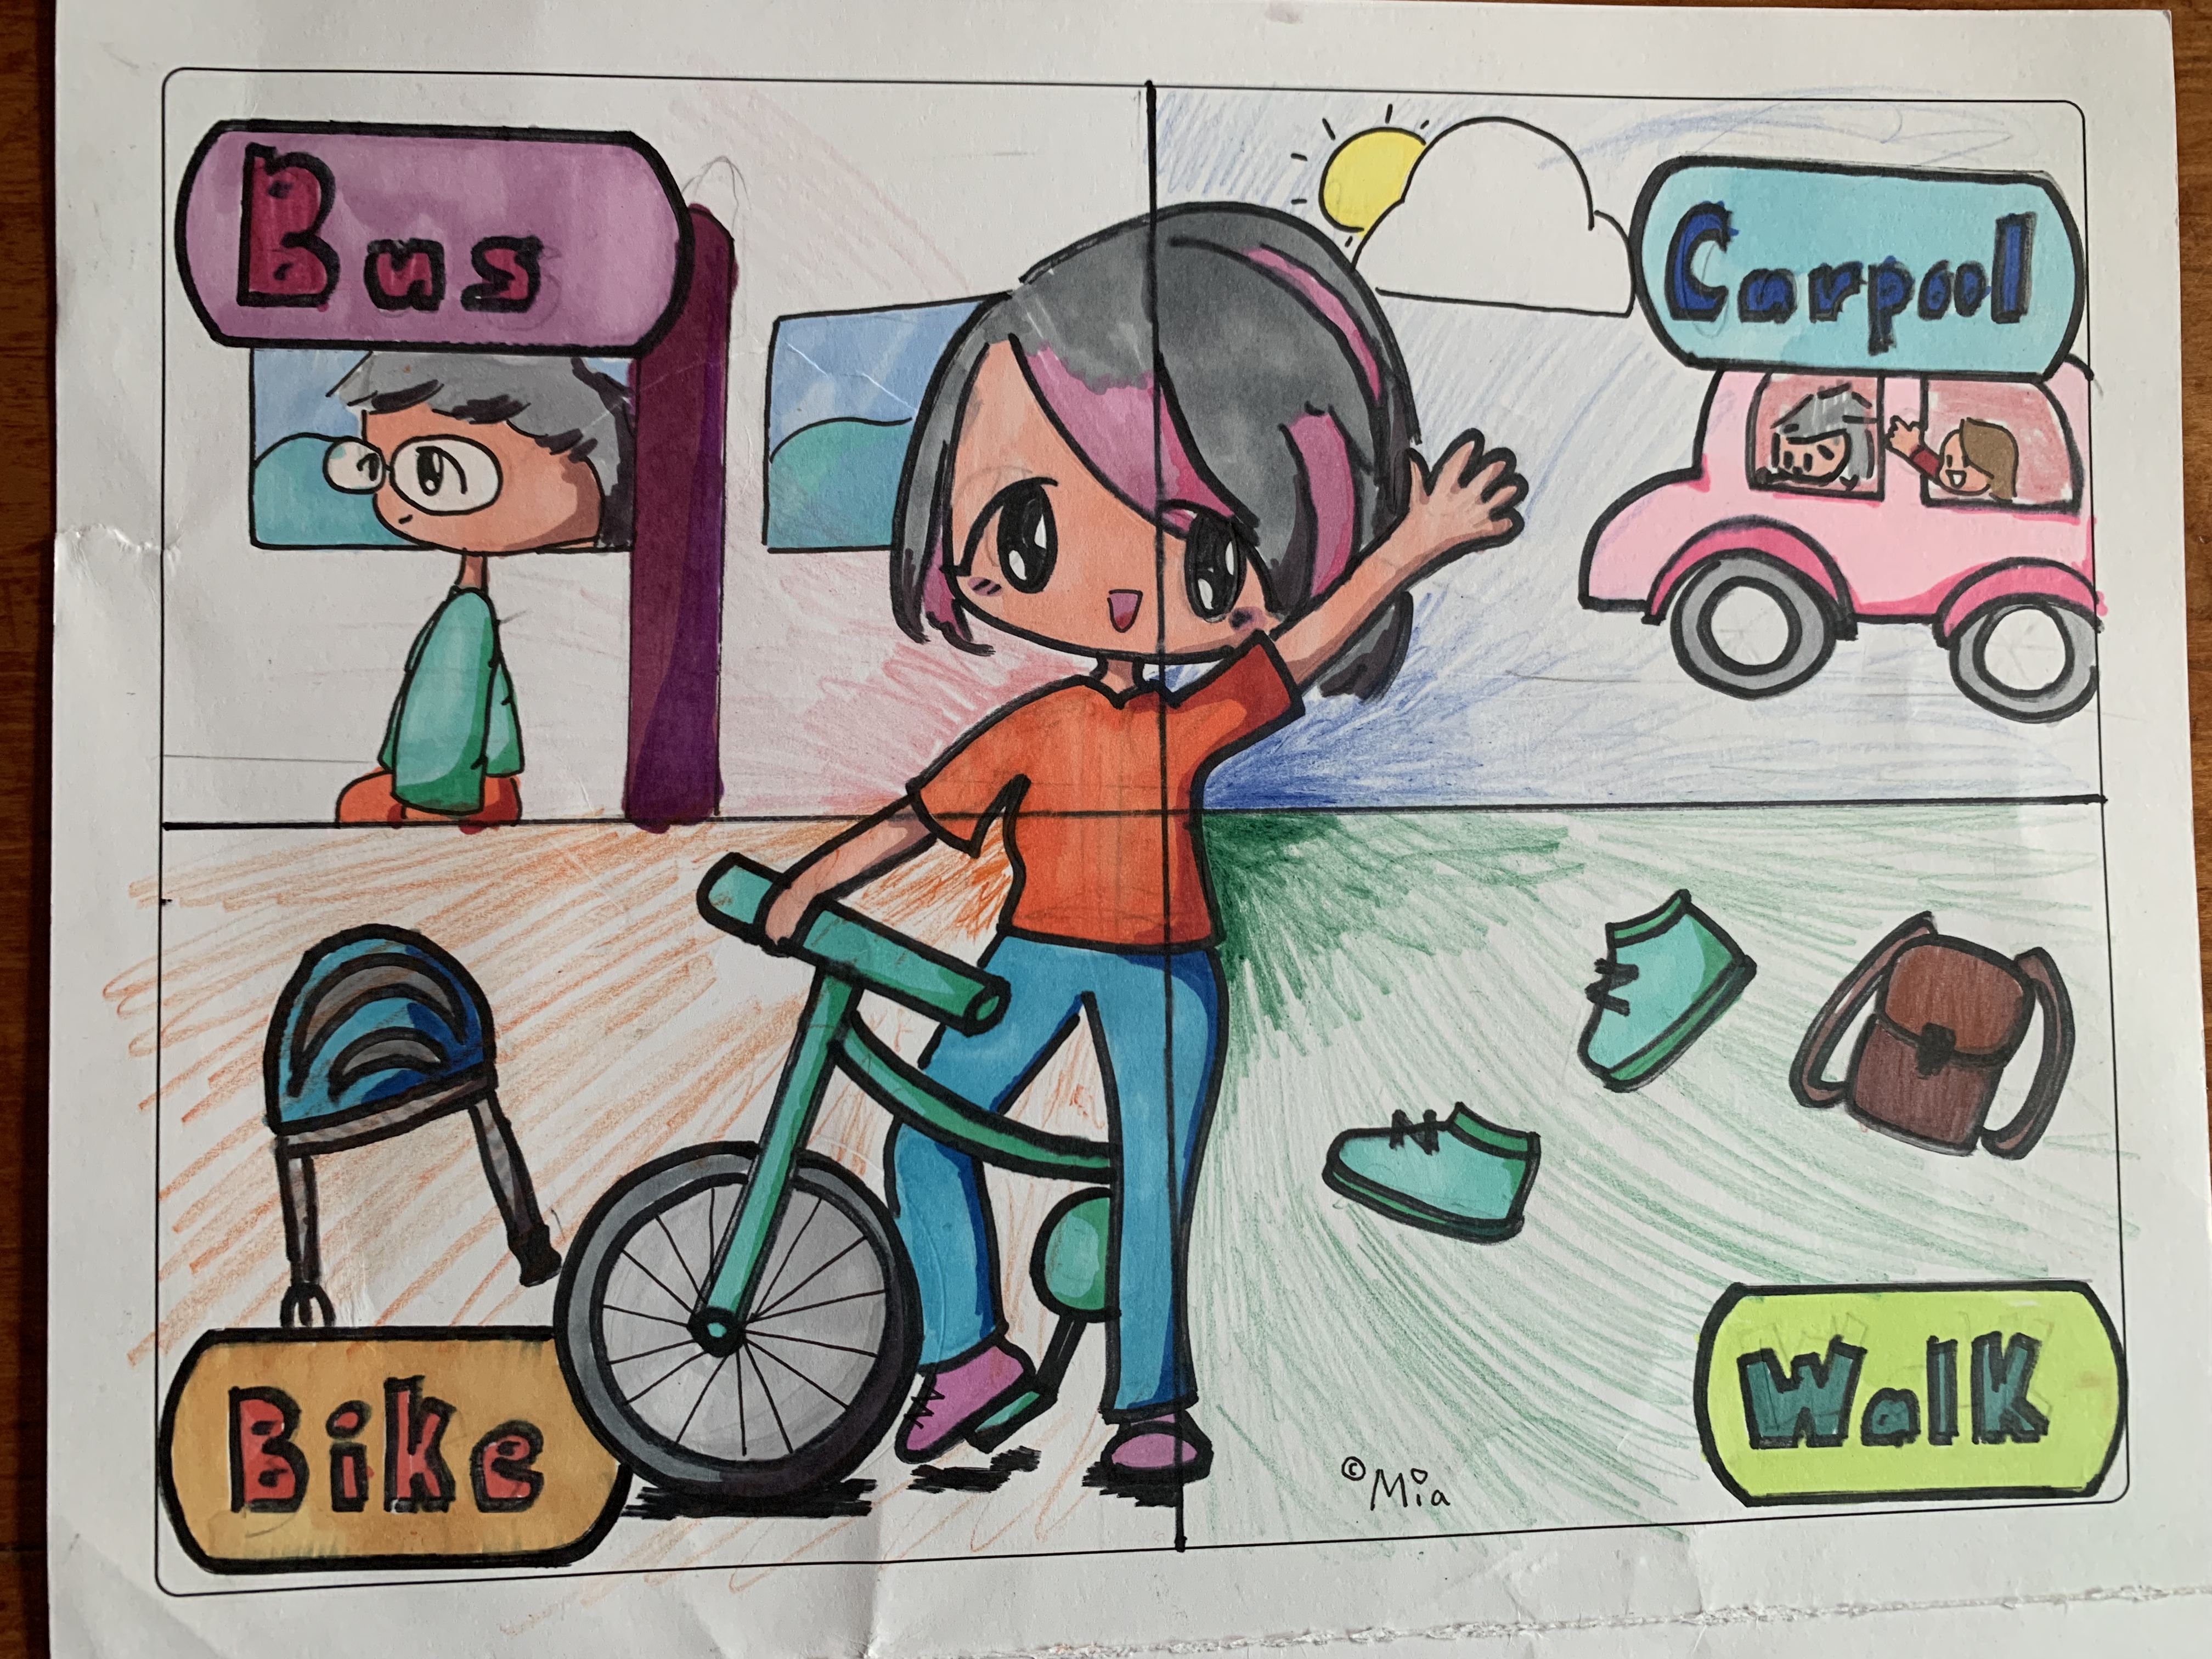 Bus, carpool, bike and walk pictures with cyclist in Anime style